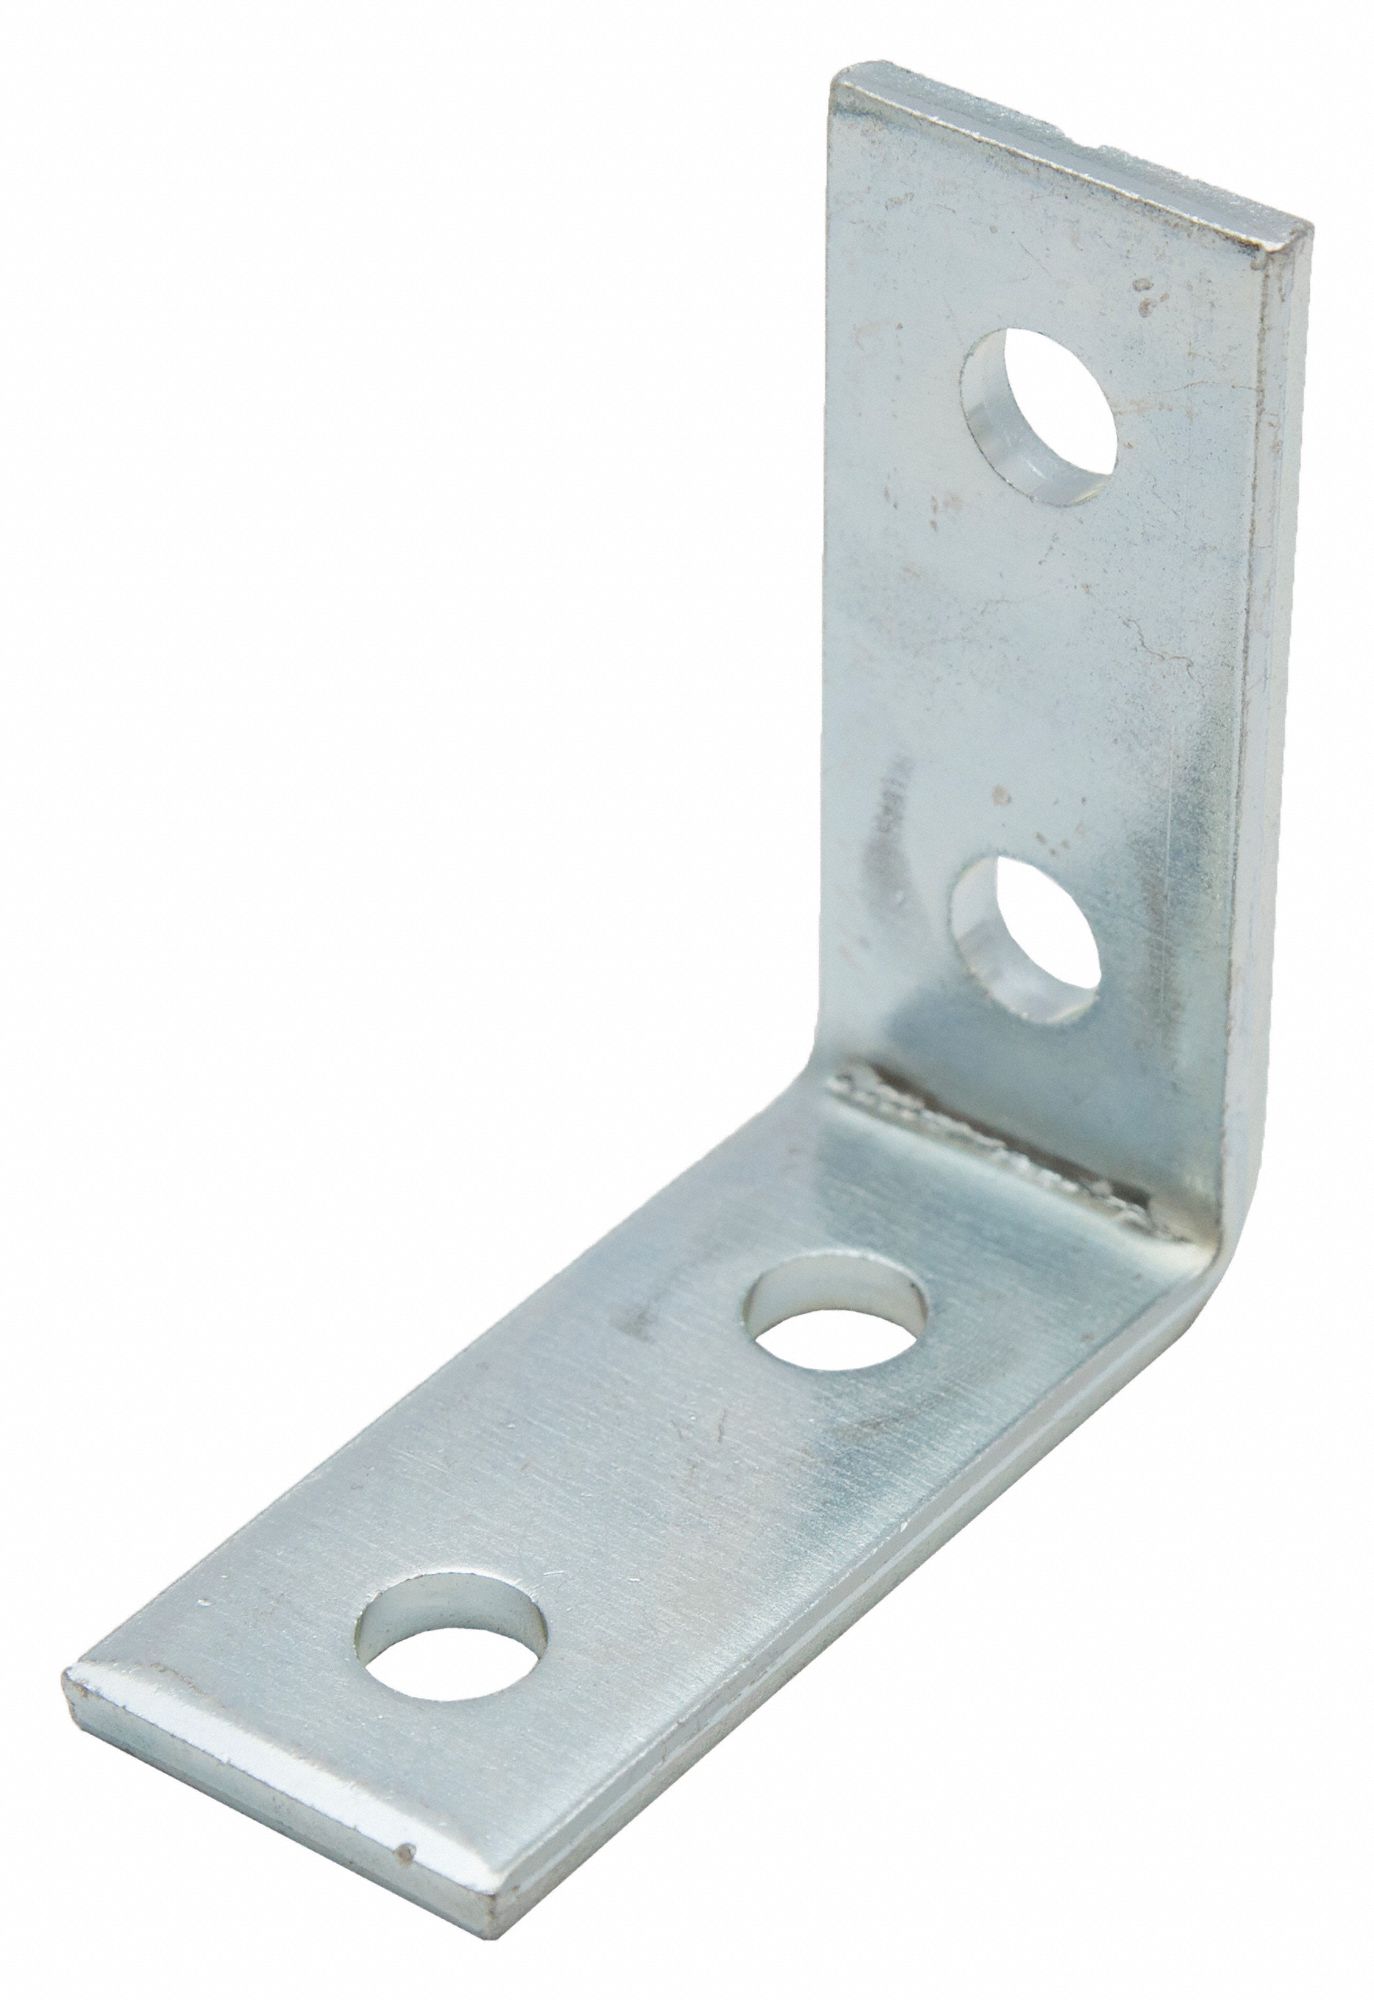 Corner Connector, 90 Degrees: 4 Holes, 1/2 in Hole Dia, Steel, Country Of Origin US